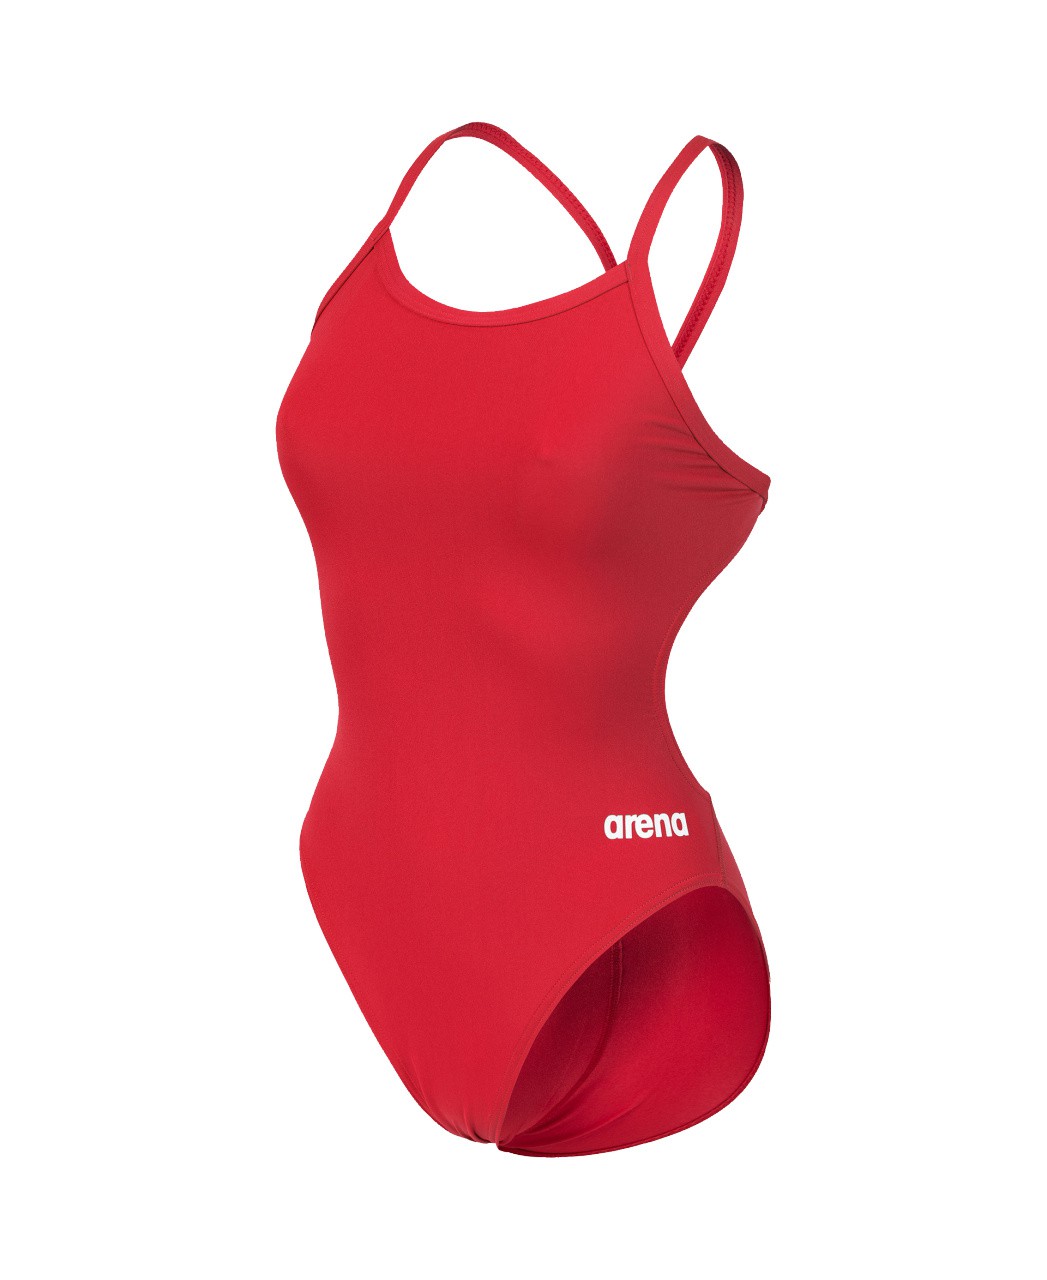 Arena Women's One Evanescence Tech Back One Piece Swimsuit at